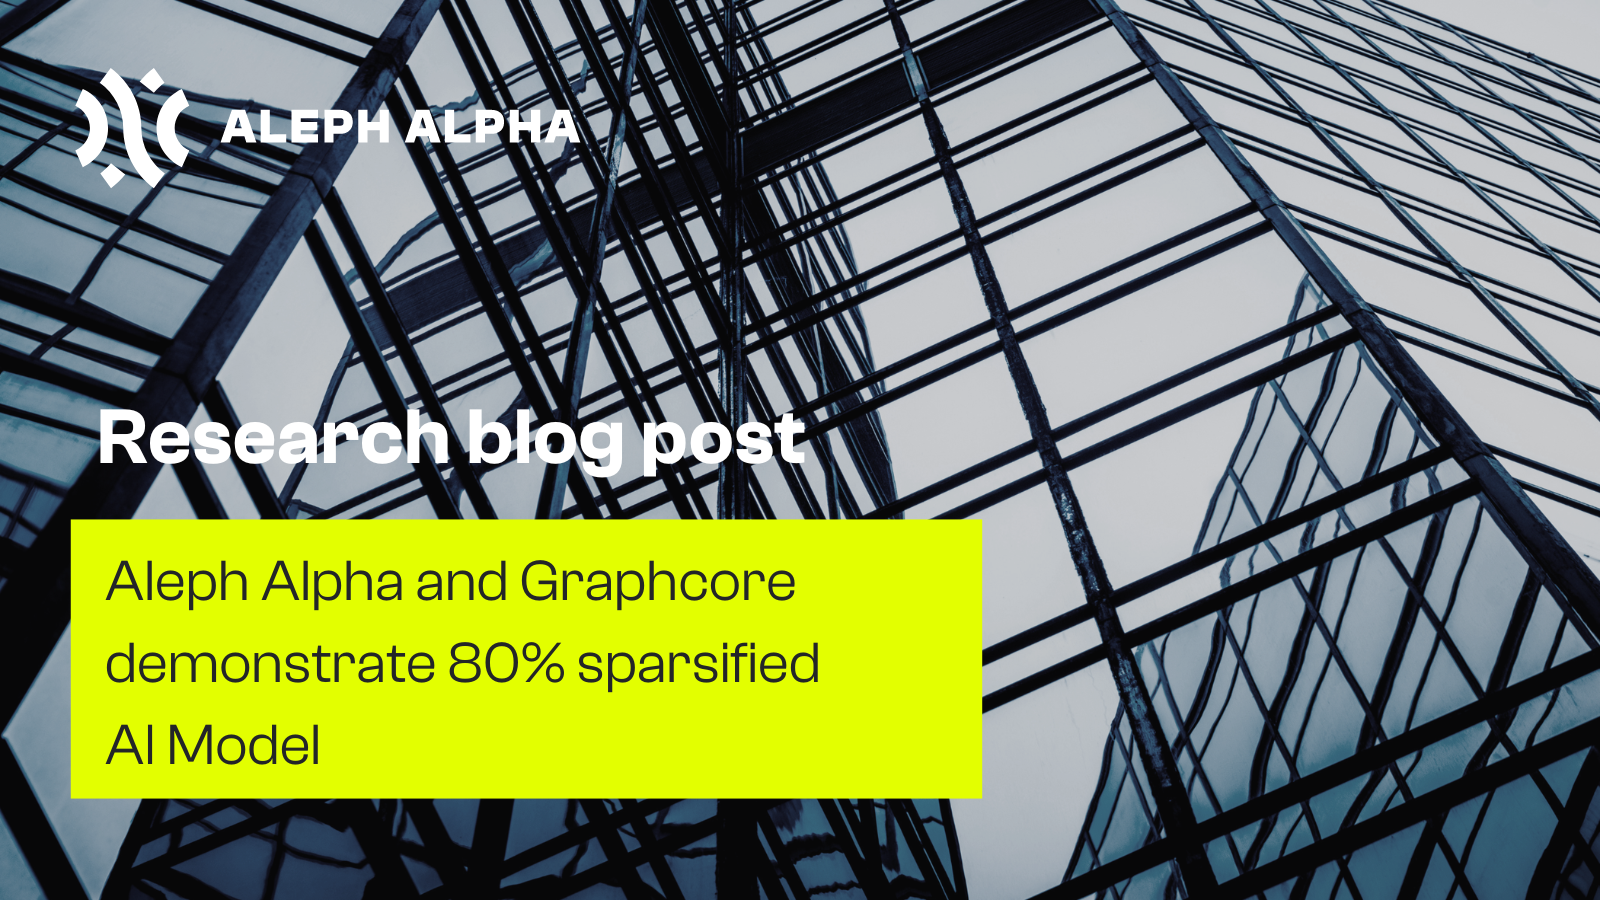 Aleph Alpha and Graphcore demonstrate 80% sparsified AI Model